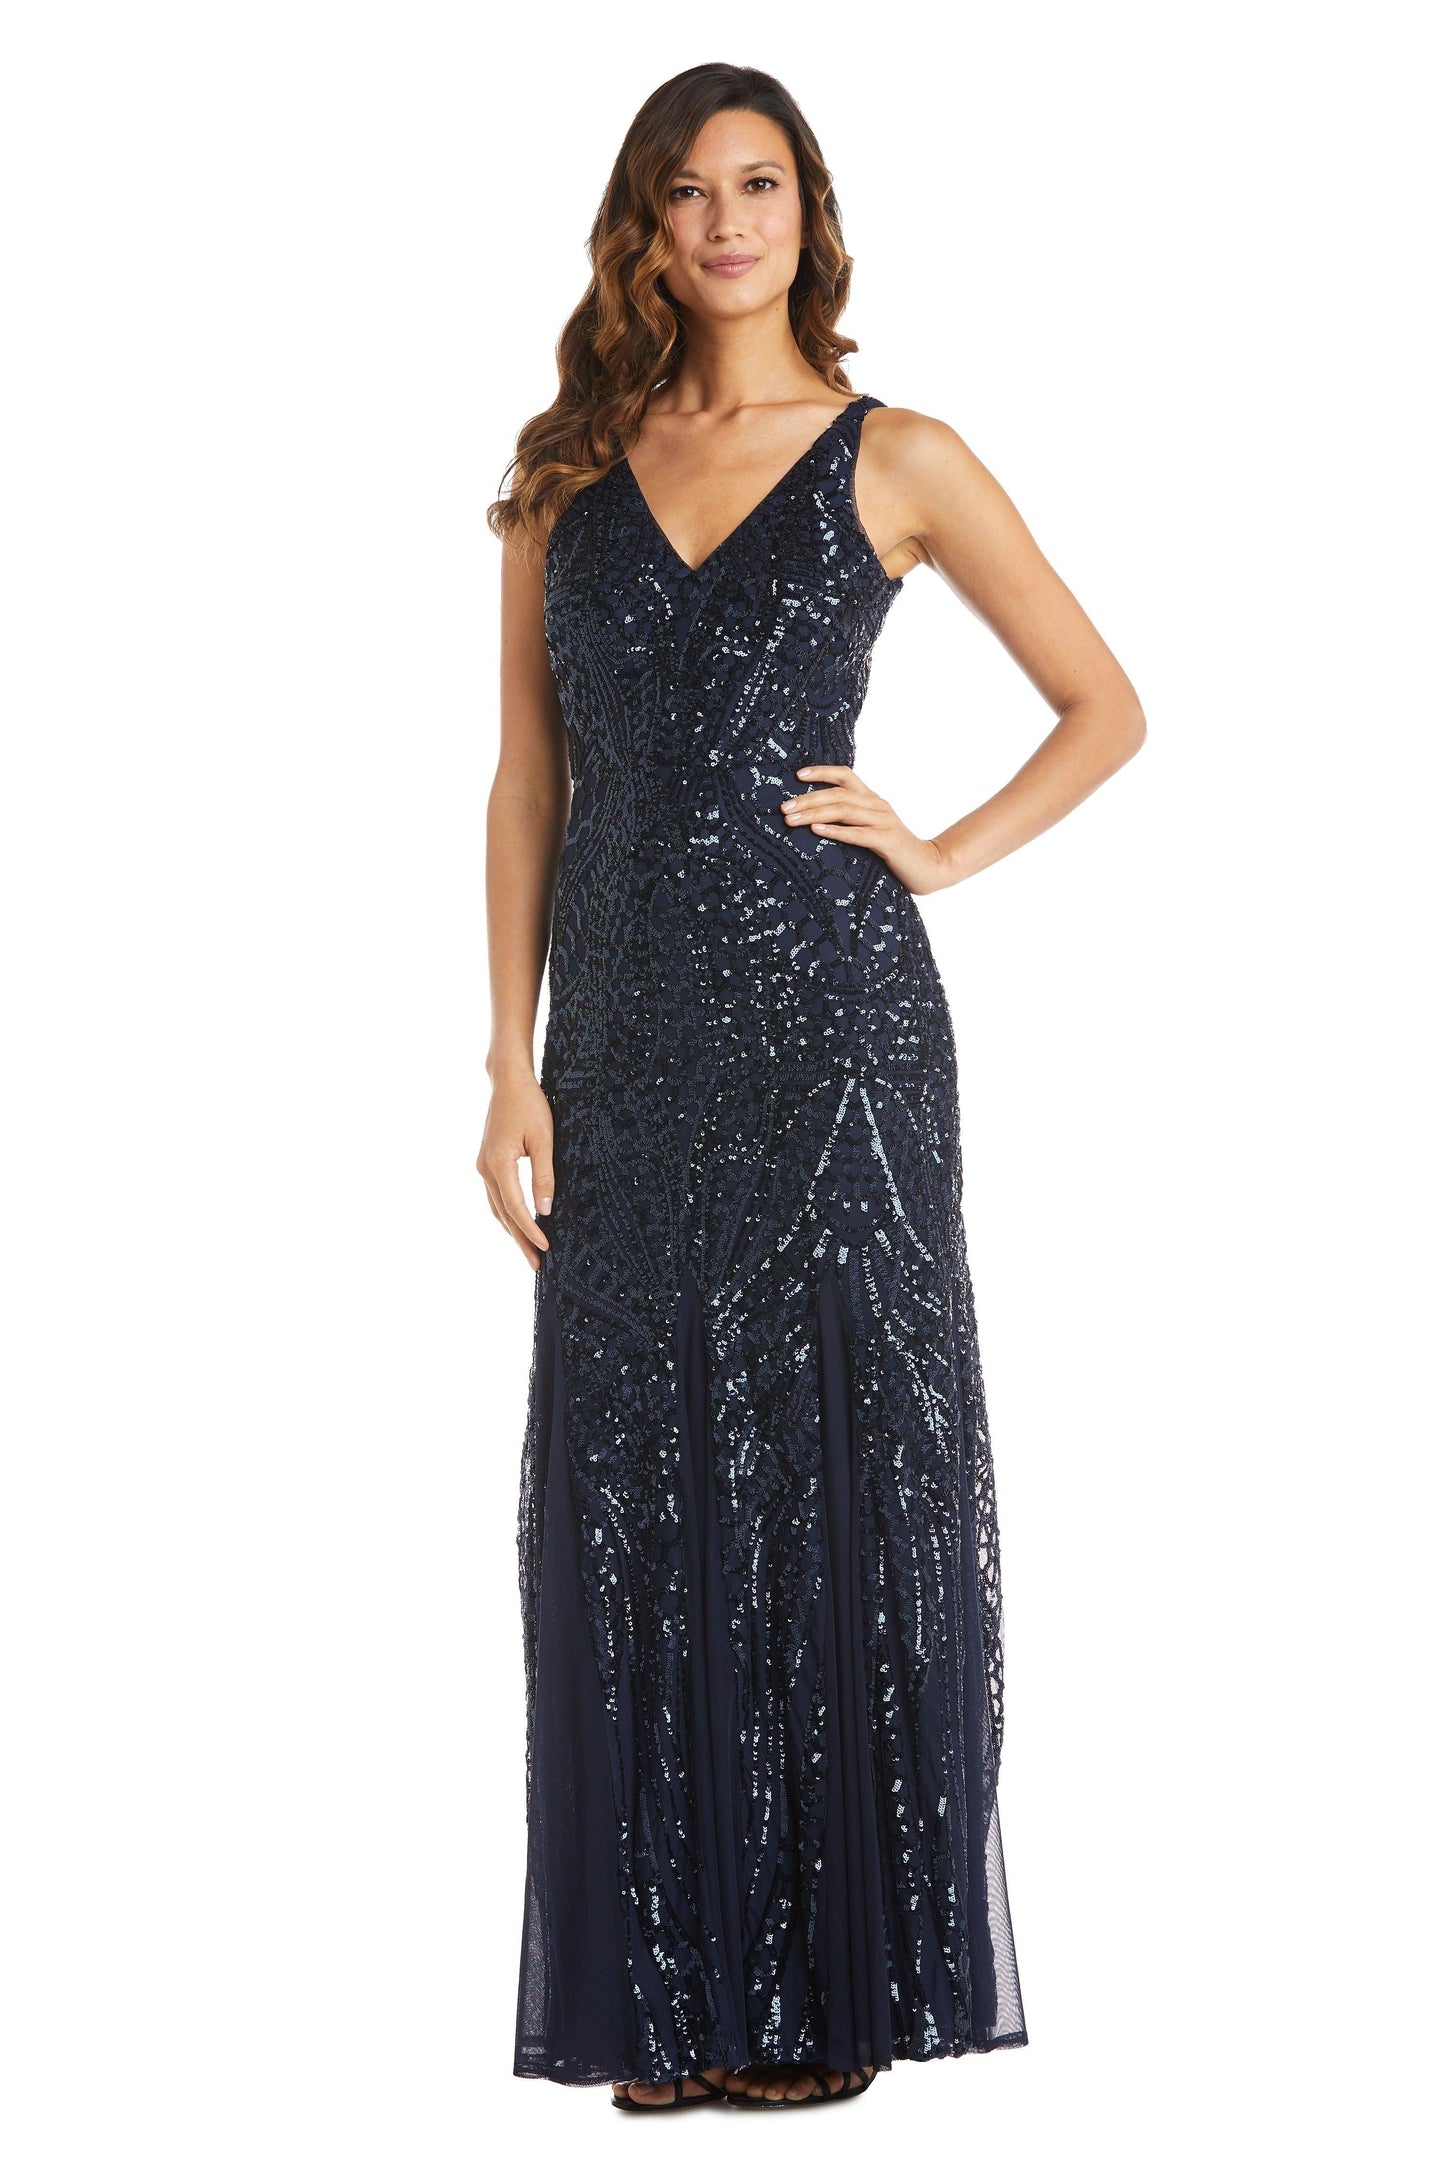 Nightway Long Formal Sleeveless Petite Dress 21685P - The Dress Outlet